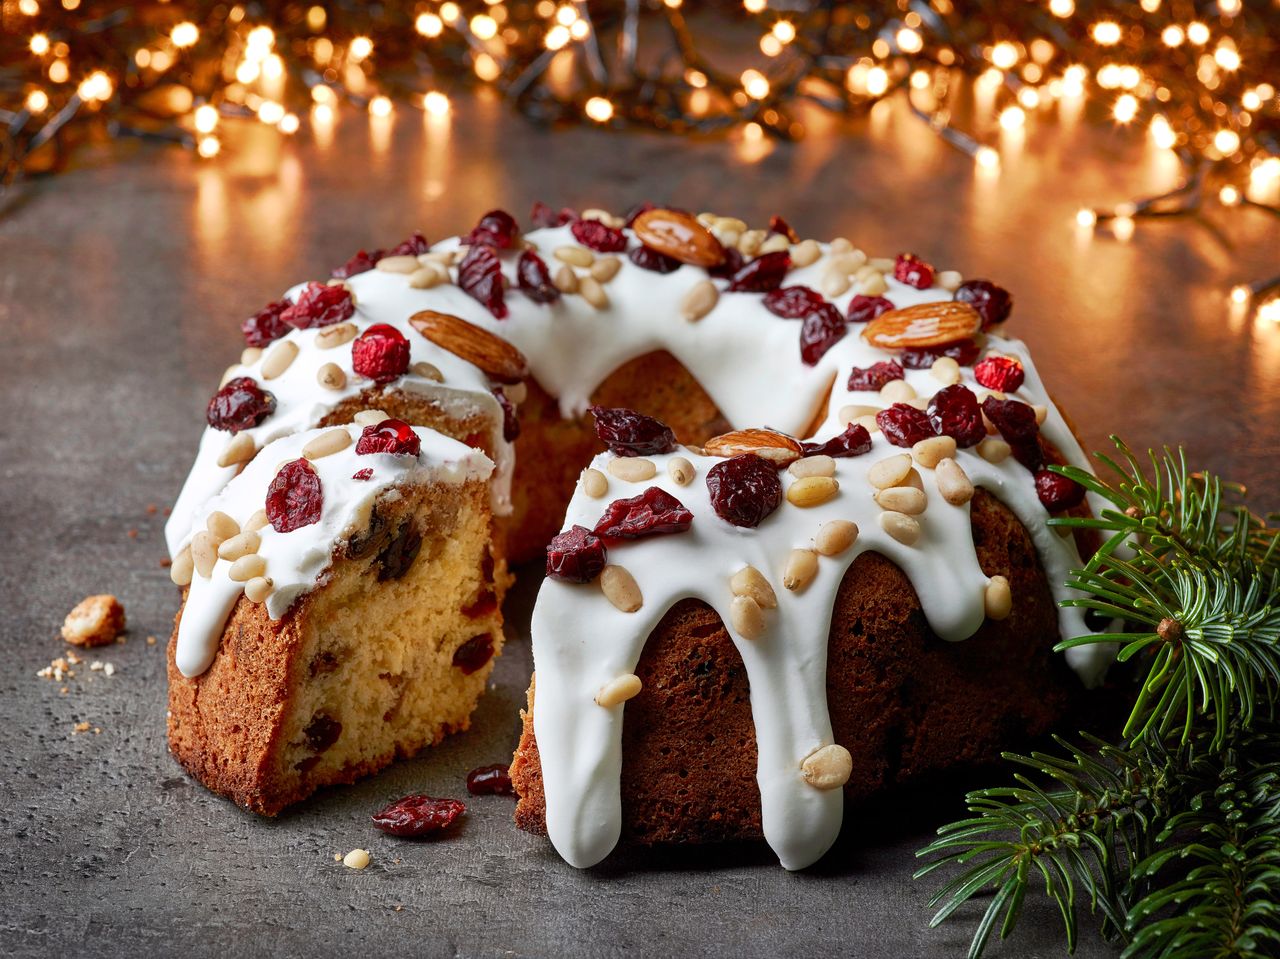 Bake your way to a merry Christmas: Mastering the perfect holiday cake from scratch